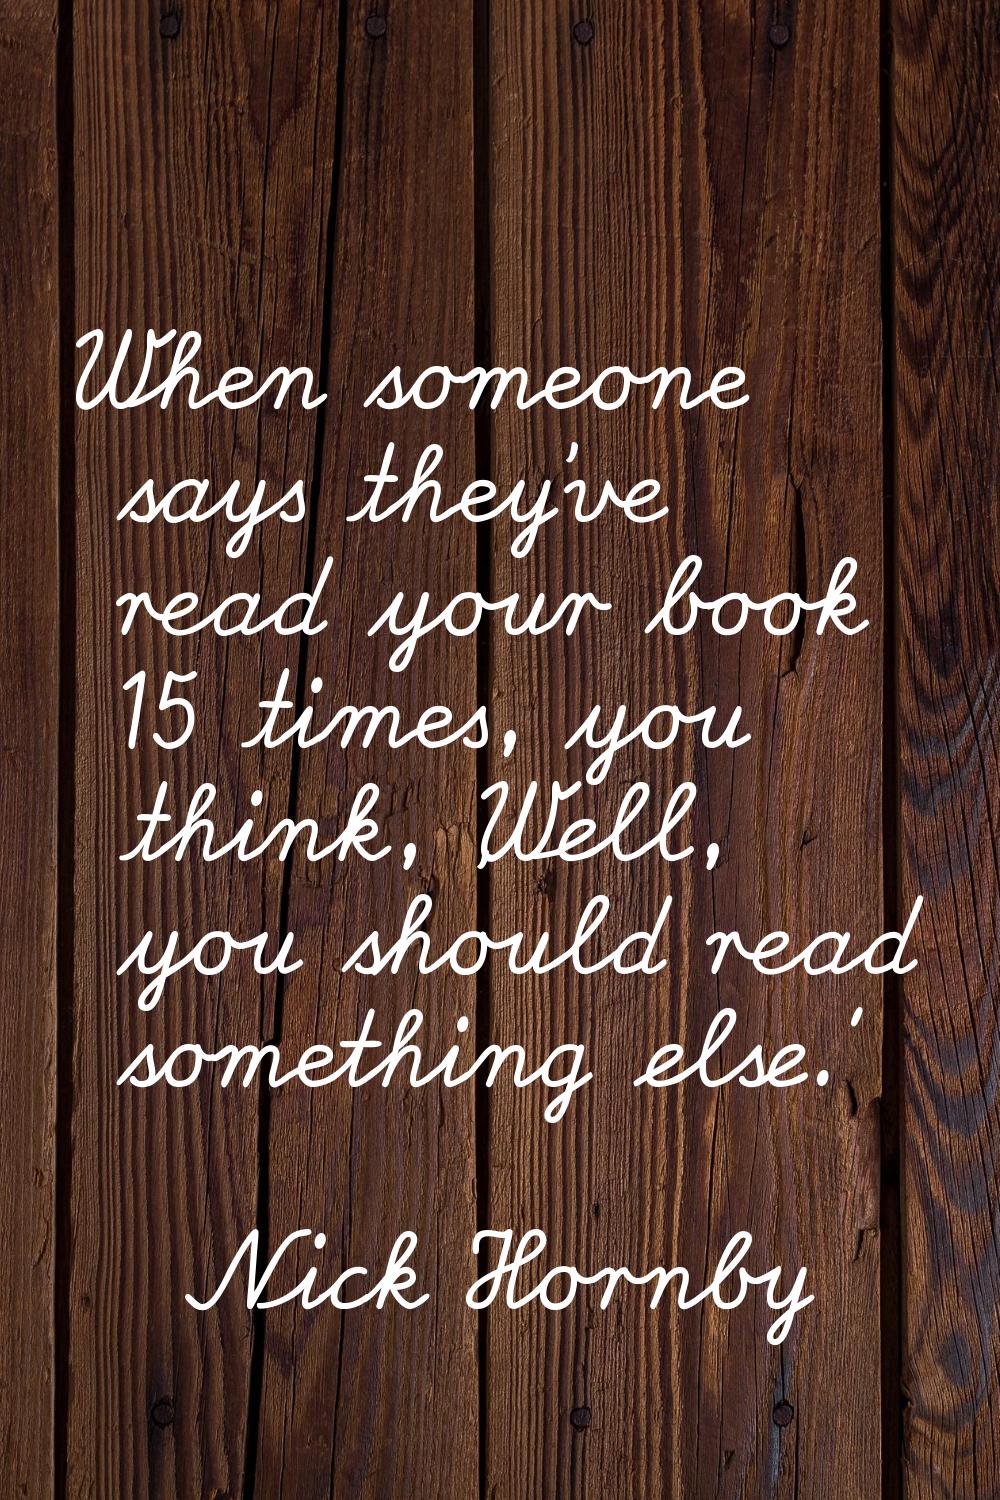 When someone says they've read your book 15 times, you think, 'Well, you should read something else